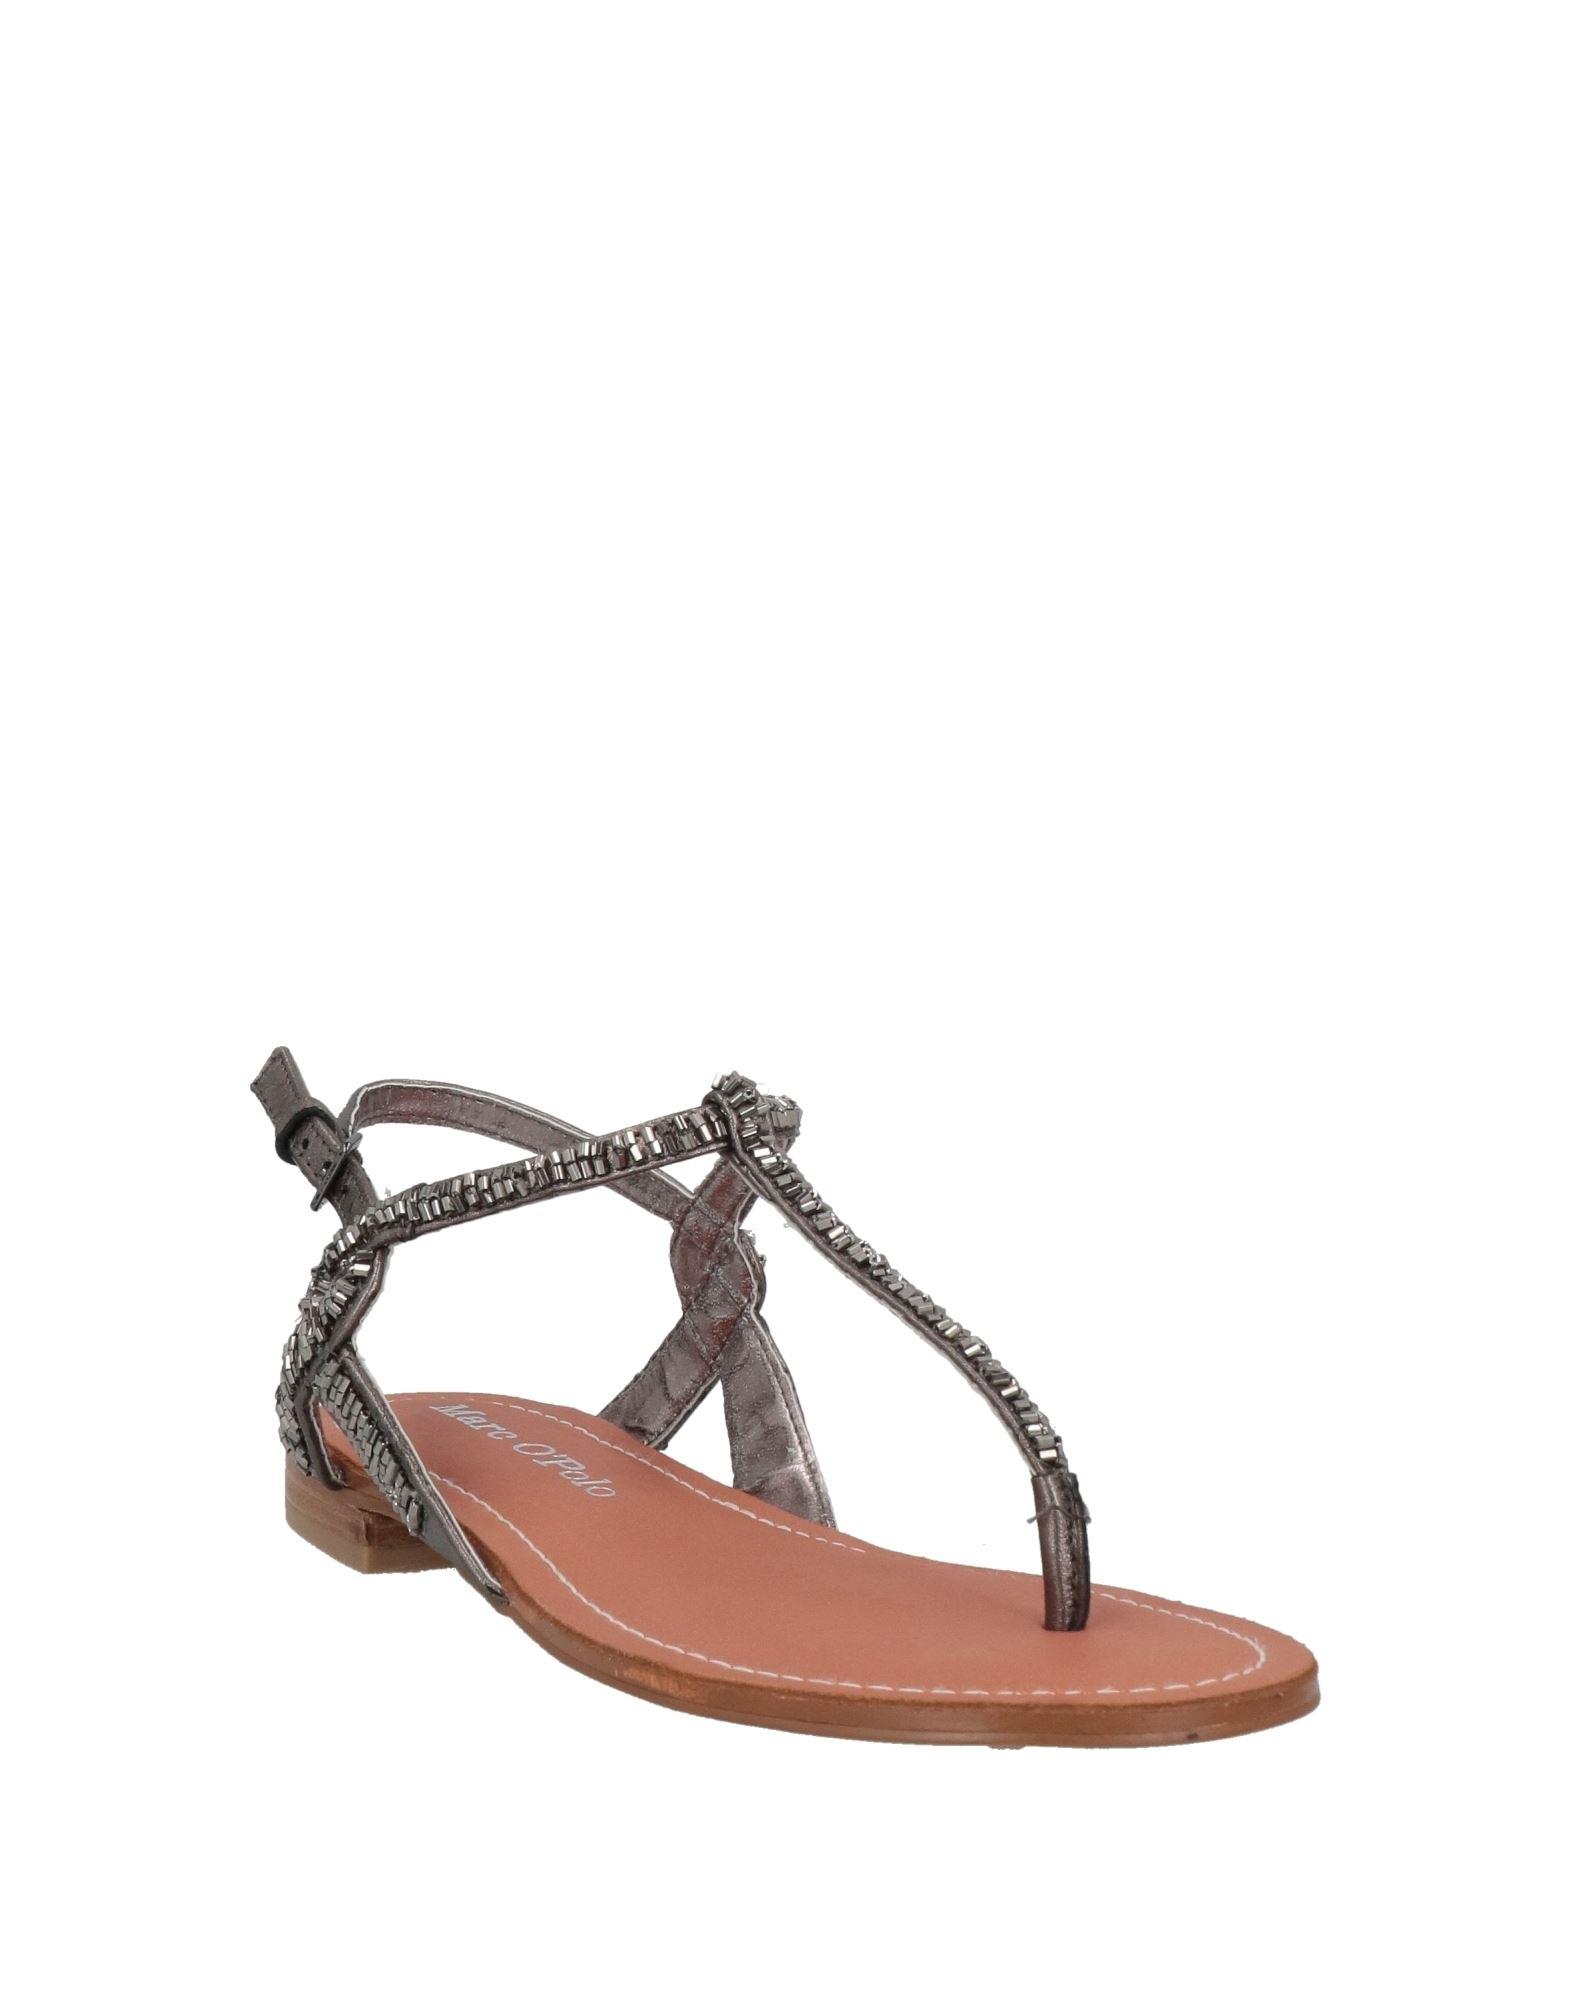 Marc O' Polo Toe Strap Sandals in Brown | Lyst